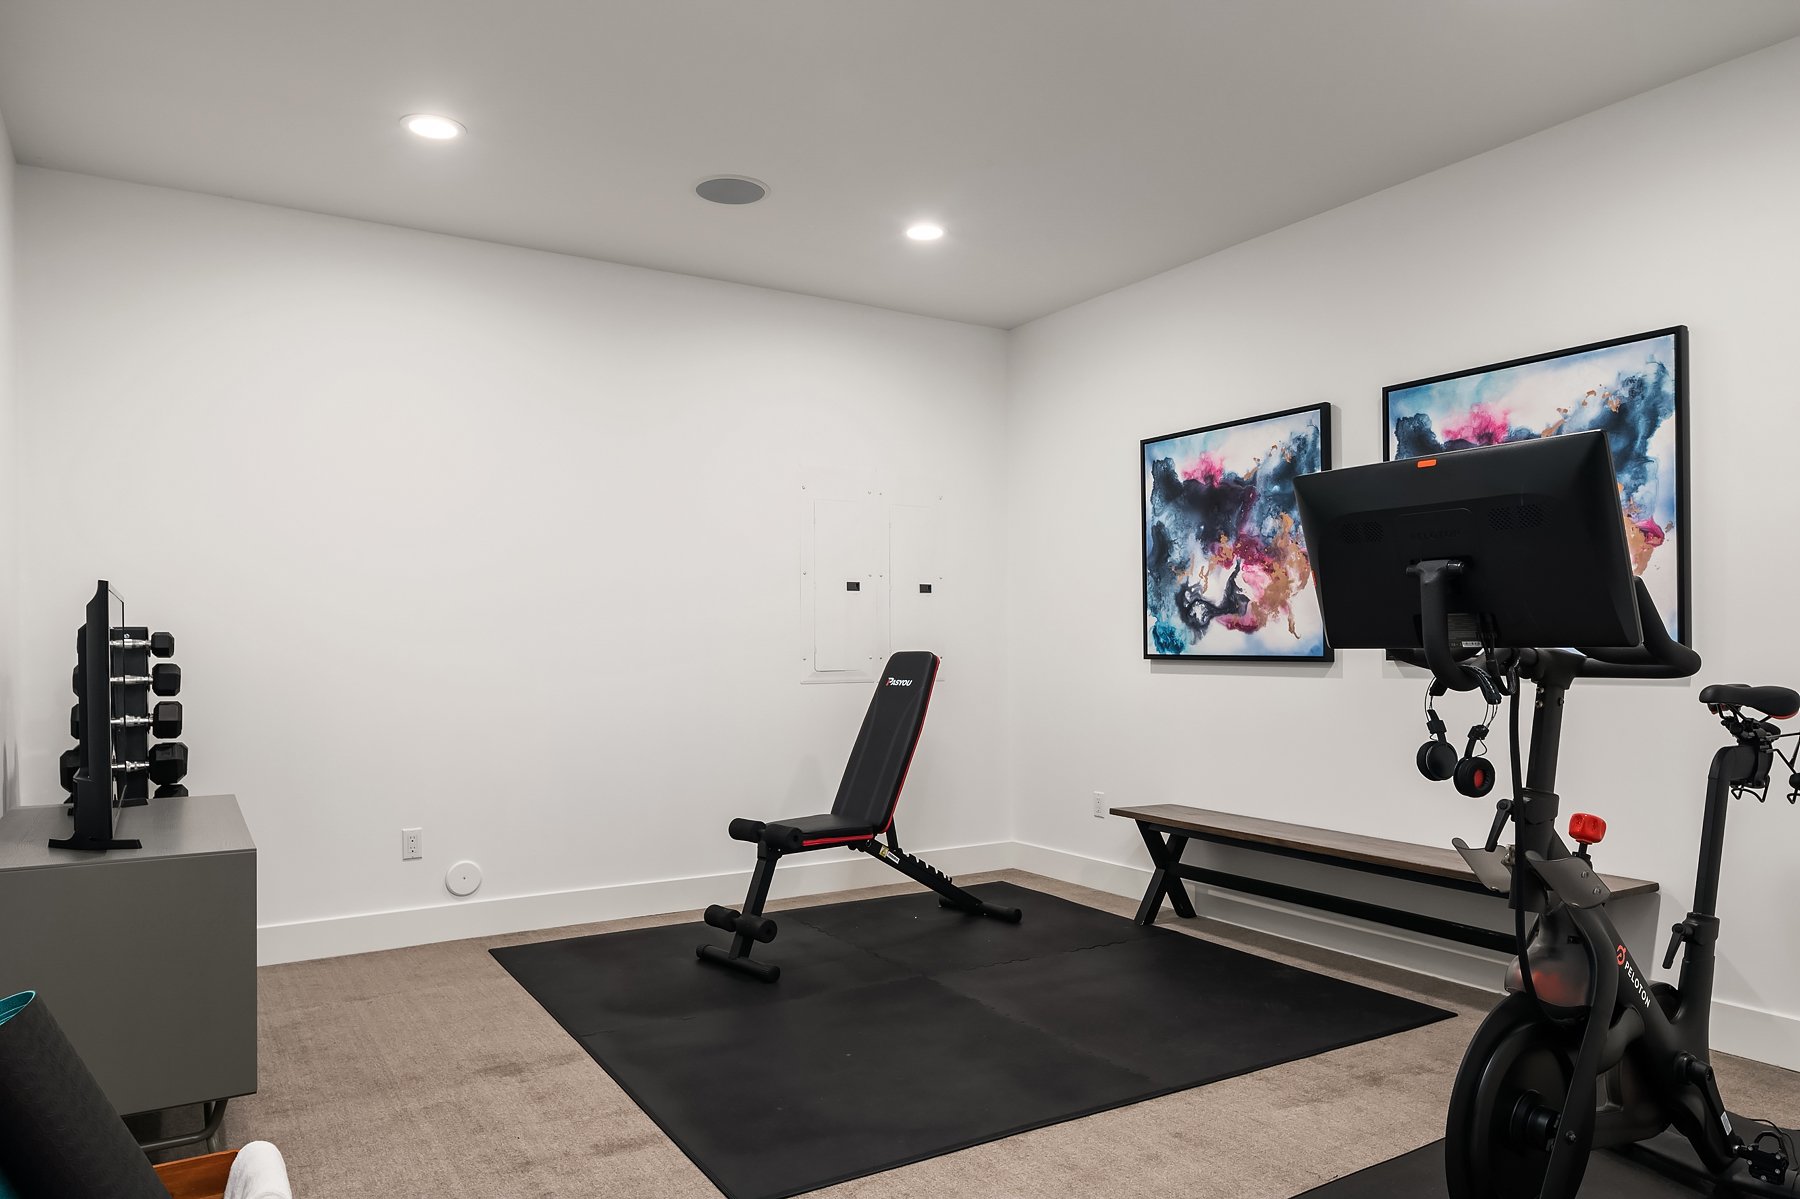  Workout room or...? 